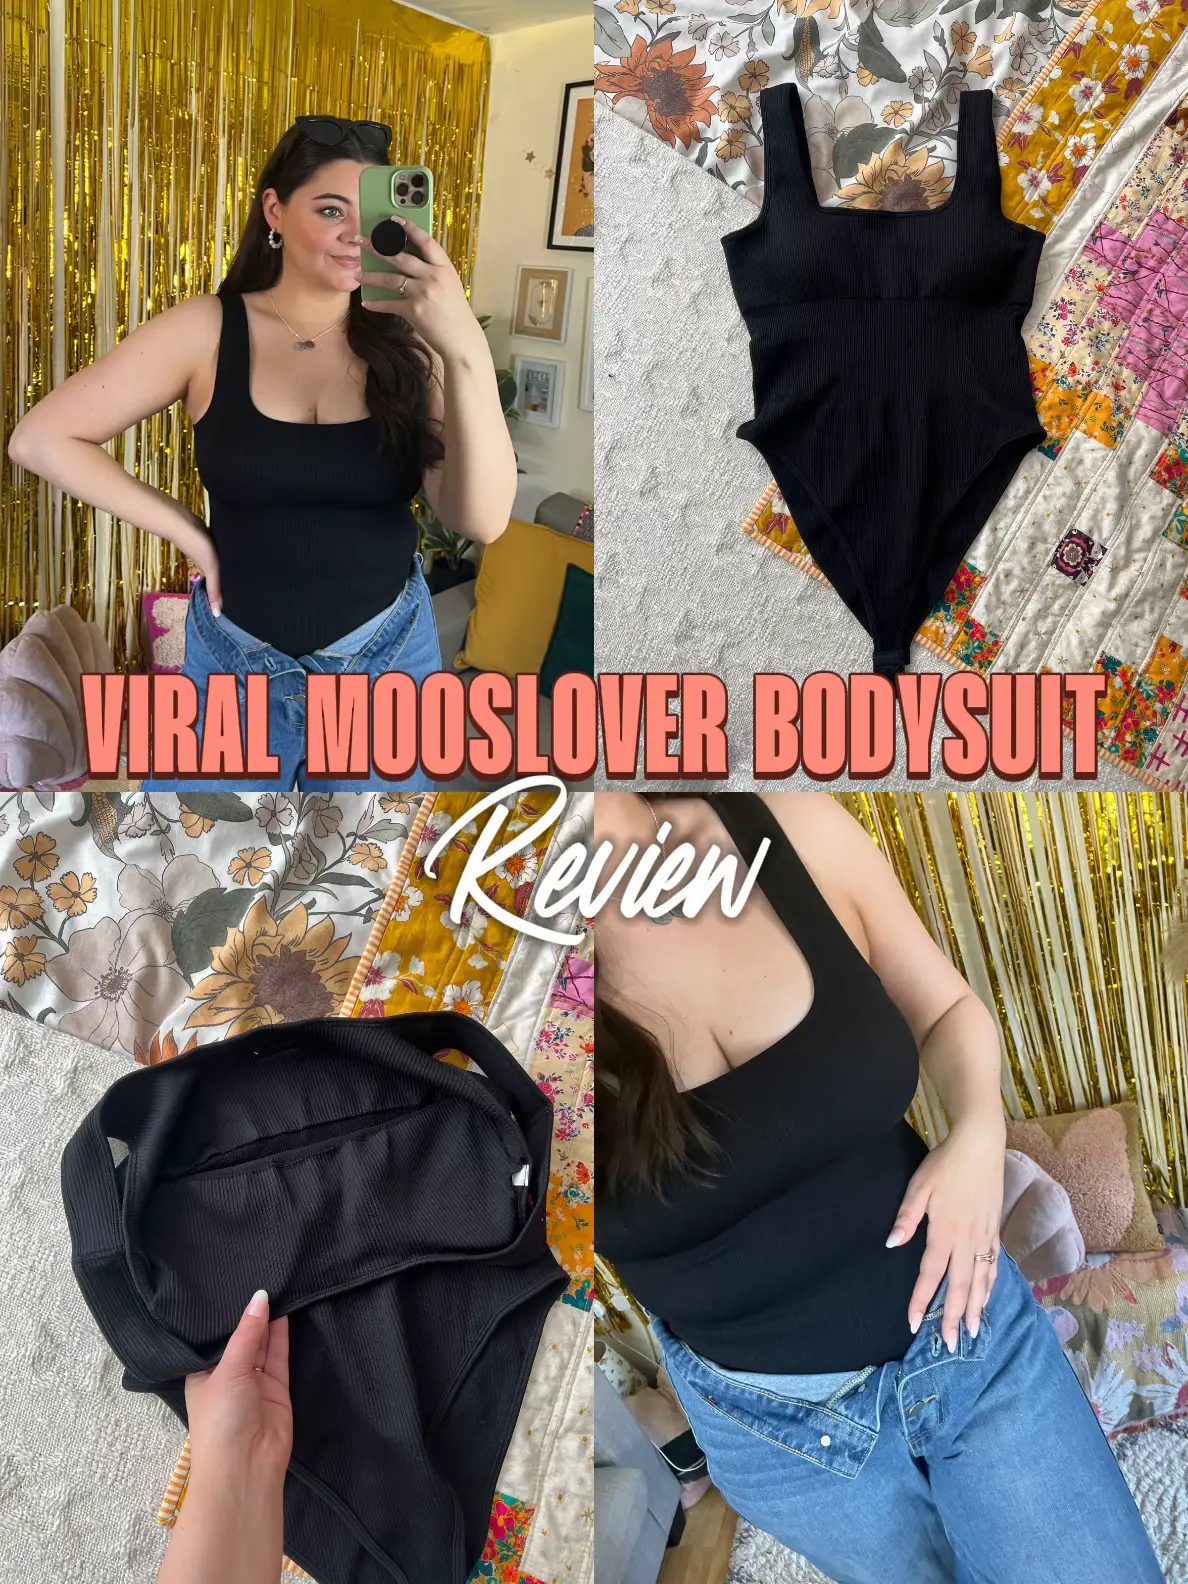 Viral Mooslover Bodysuit ✨Review✨, Gallery posted by Shannon Pursey